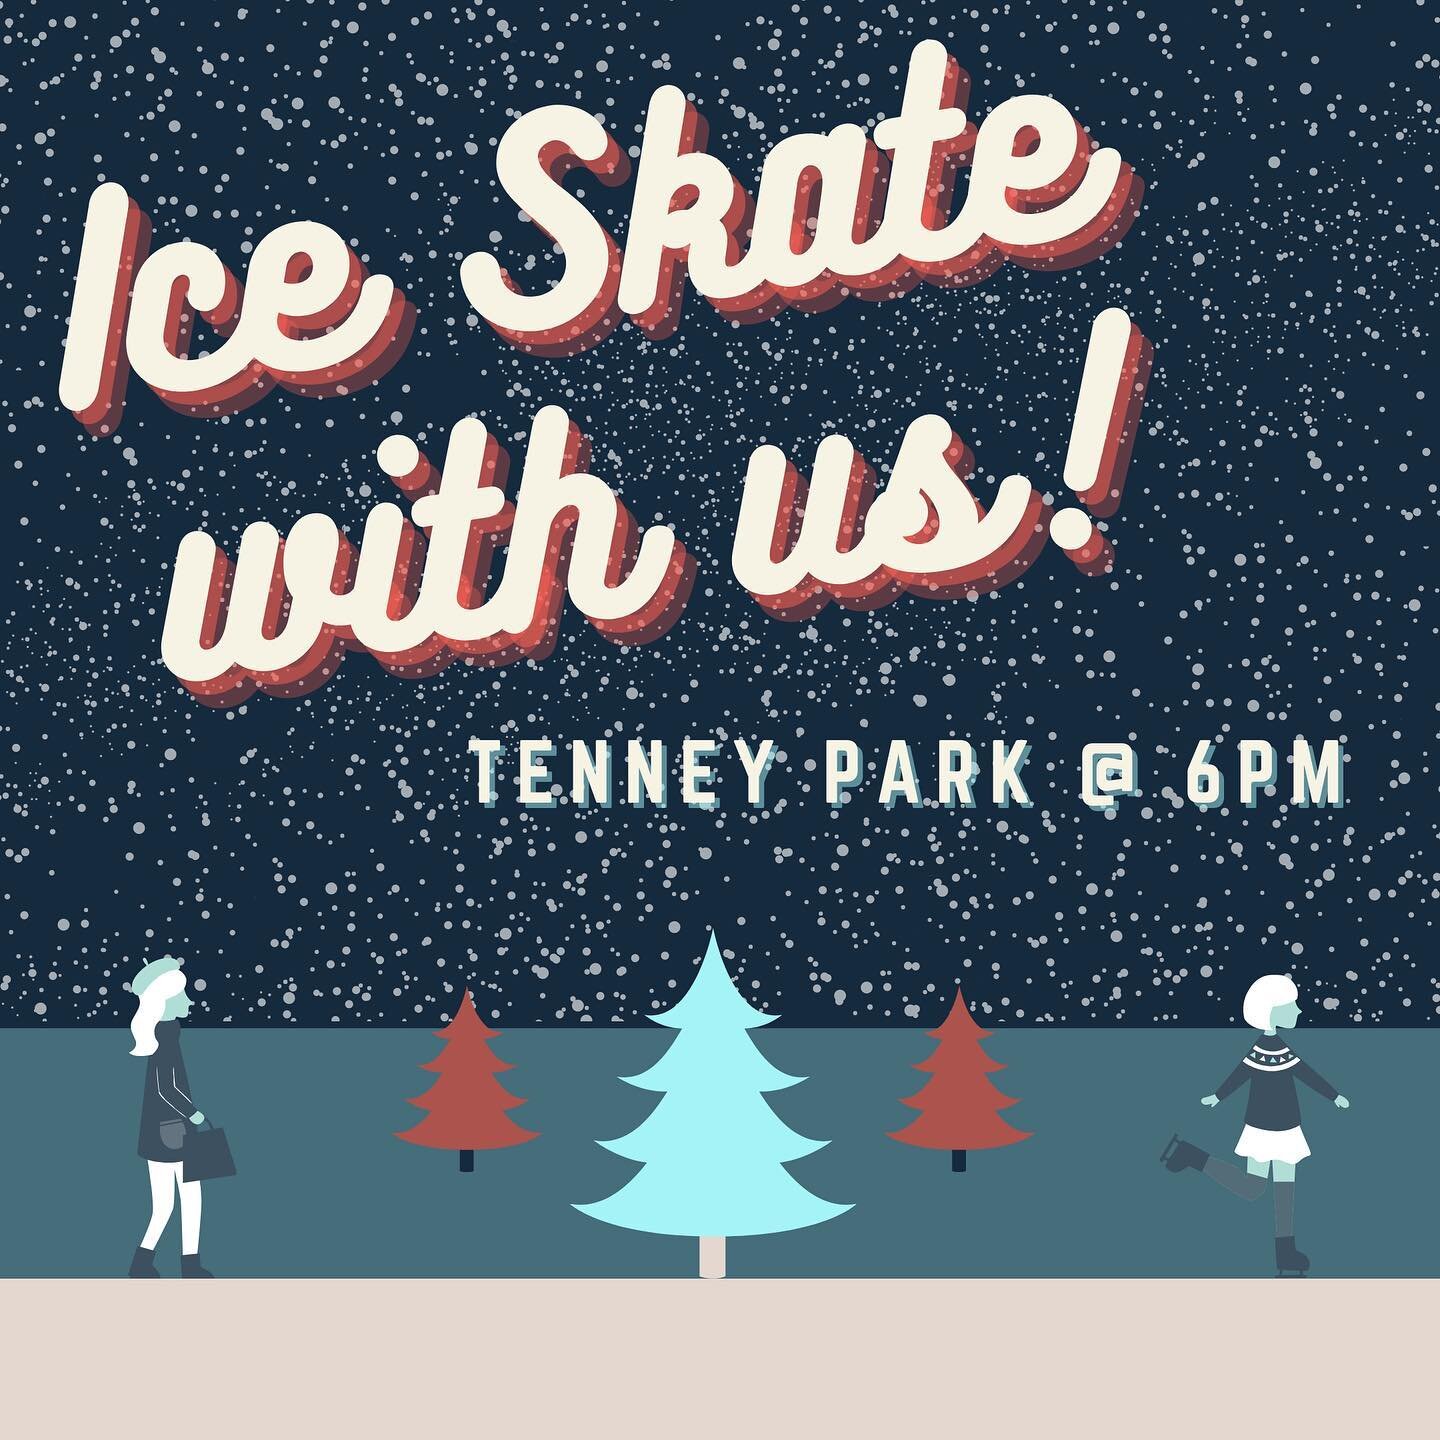 ⛸🥶❄️ Tomorrow!!! The good news is there will be a high of 19 😂 Make sure to layer up and join us Friday at 6pm at Tenney park. The cost to rent skates is $6 for the first hour and $2 for an additional hour. Message us if you need a ride or more det